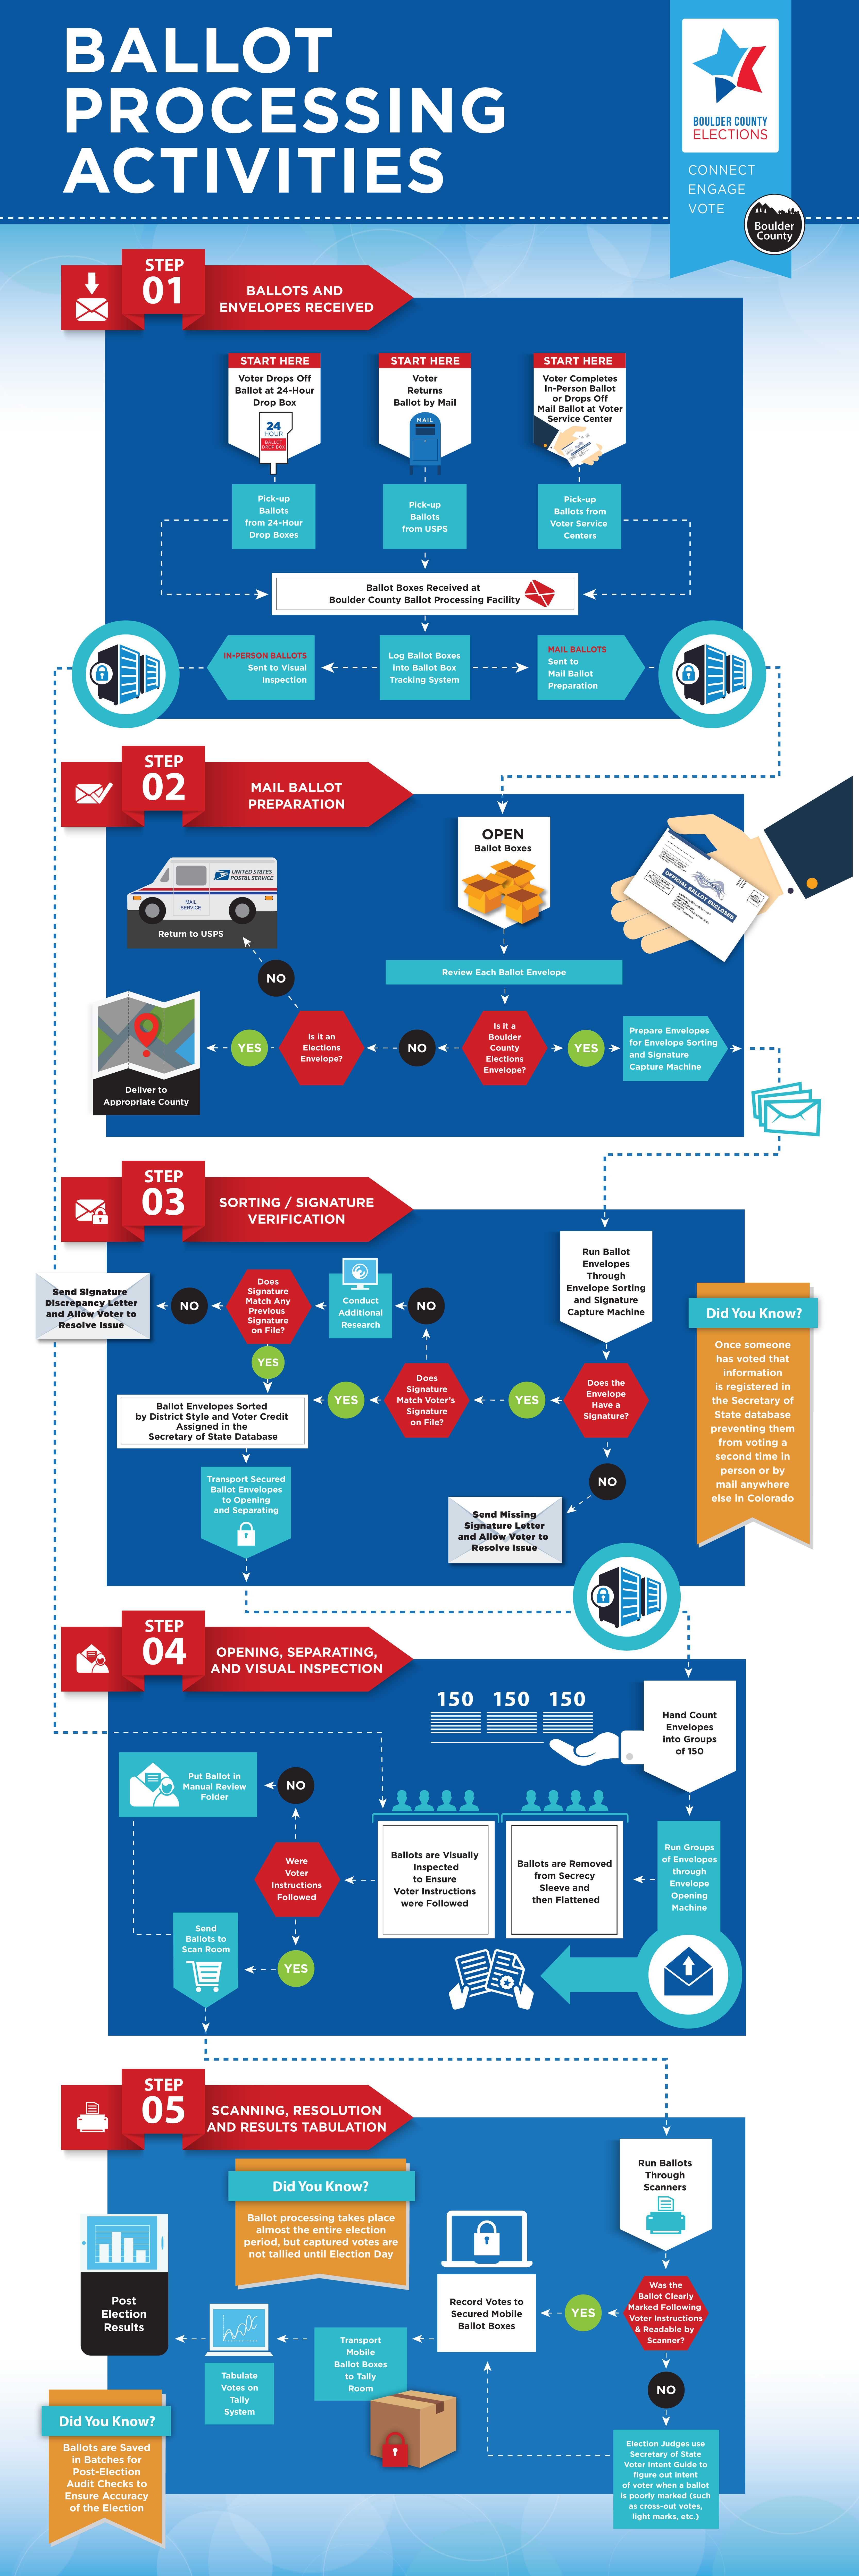 Ballot Processing Infographic